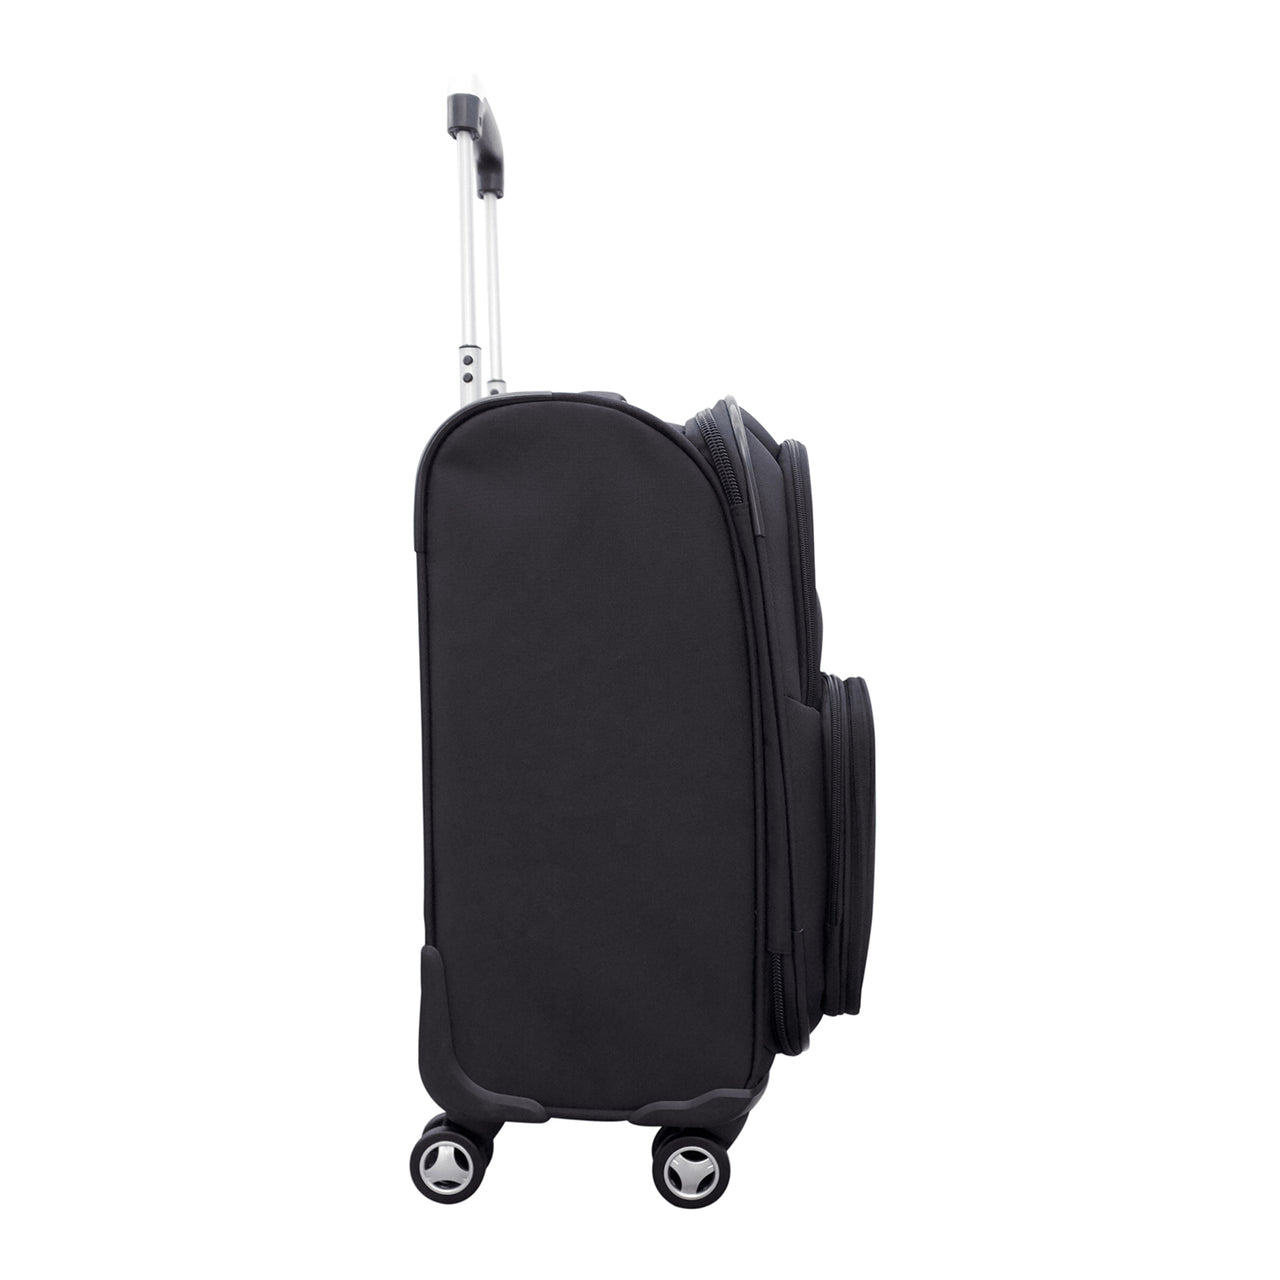 San Diego Padres 20" Carry-on Spinner Luggage